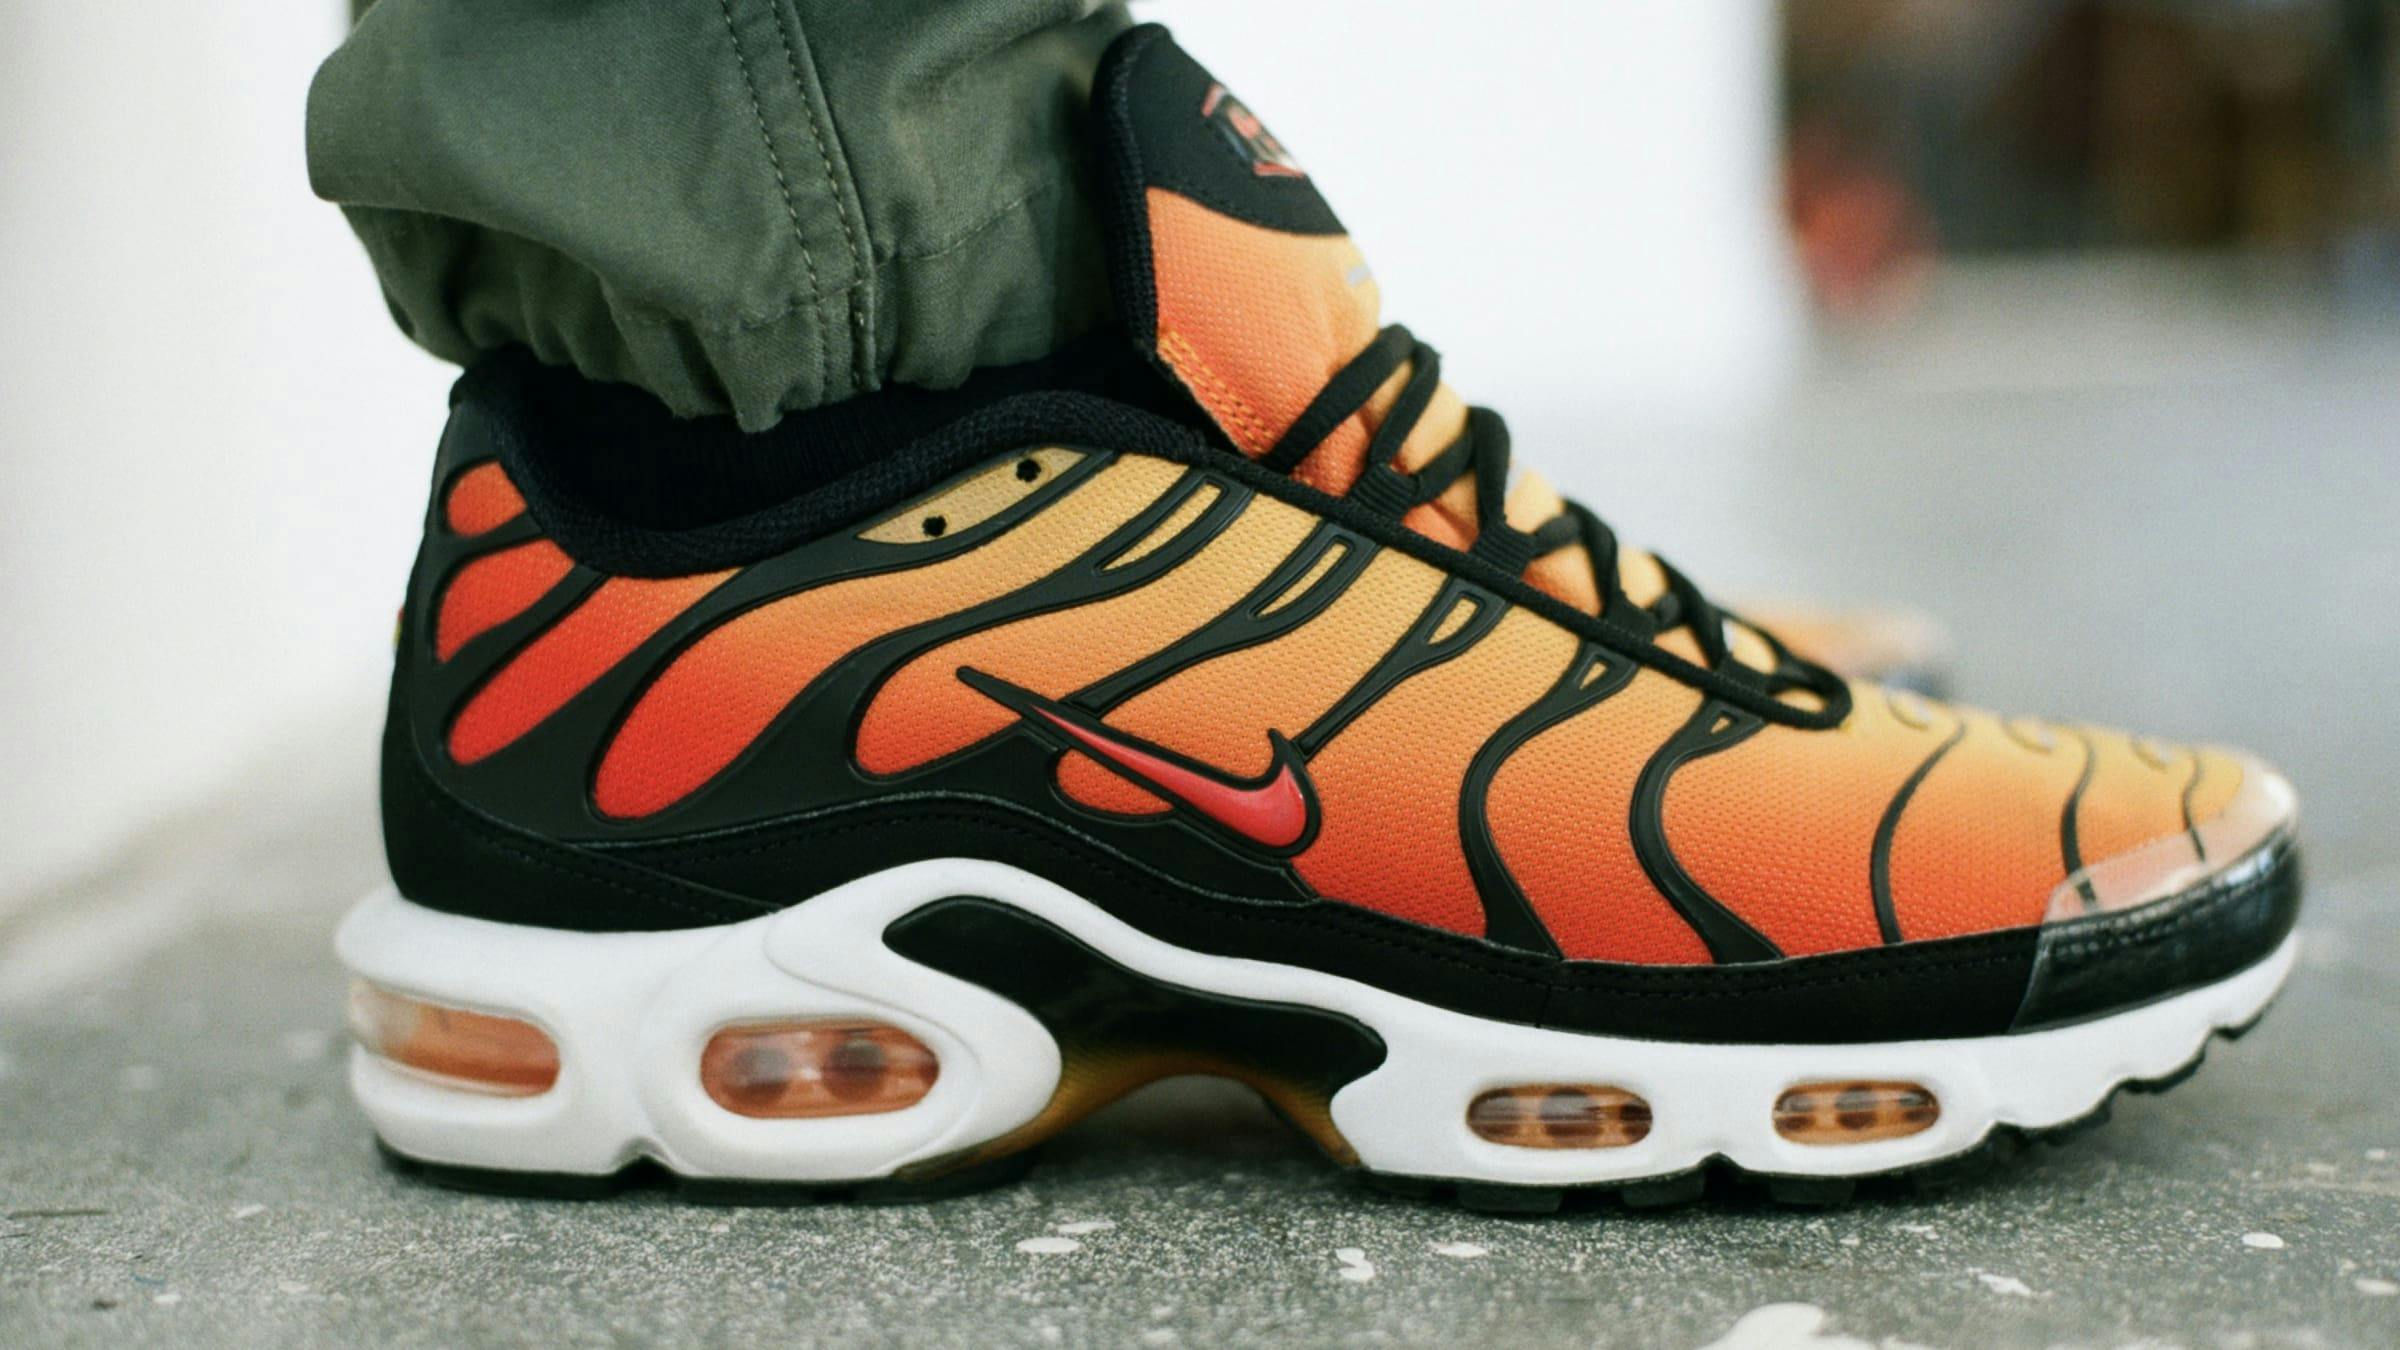 Nike Air Max Plus (TN) 'Sunset Orange' - Now on END. (FR) Launches | END. (FR)